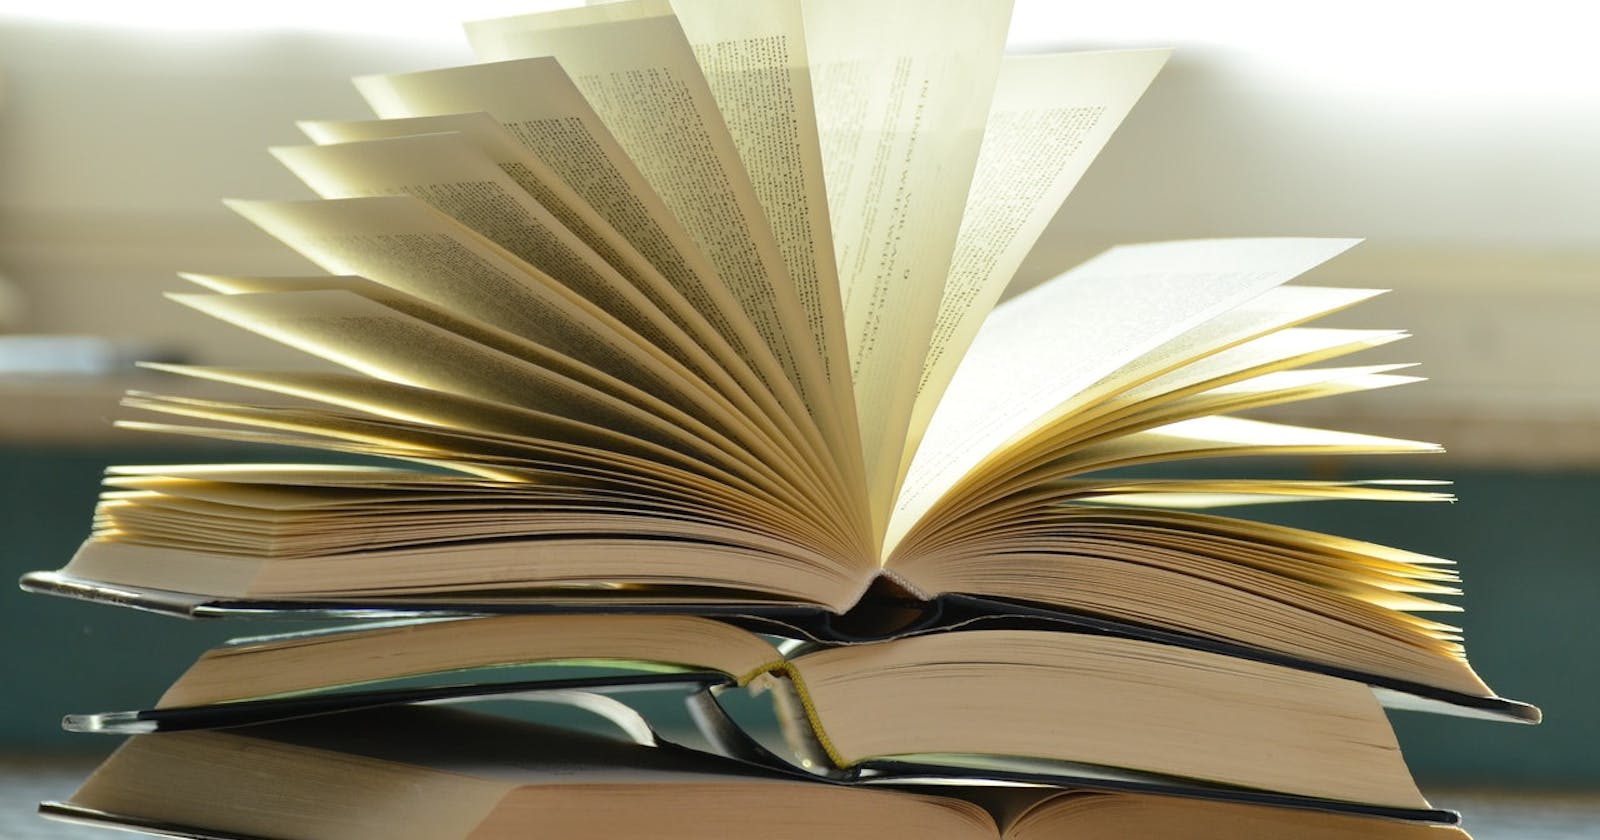 5 Books That Can Completely Change Your Life